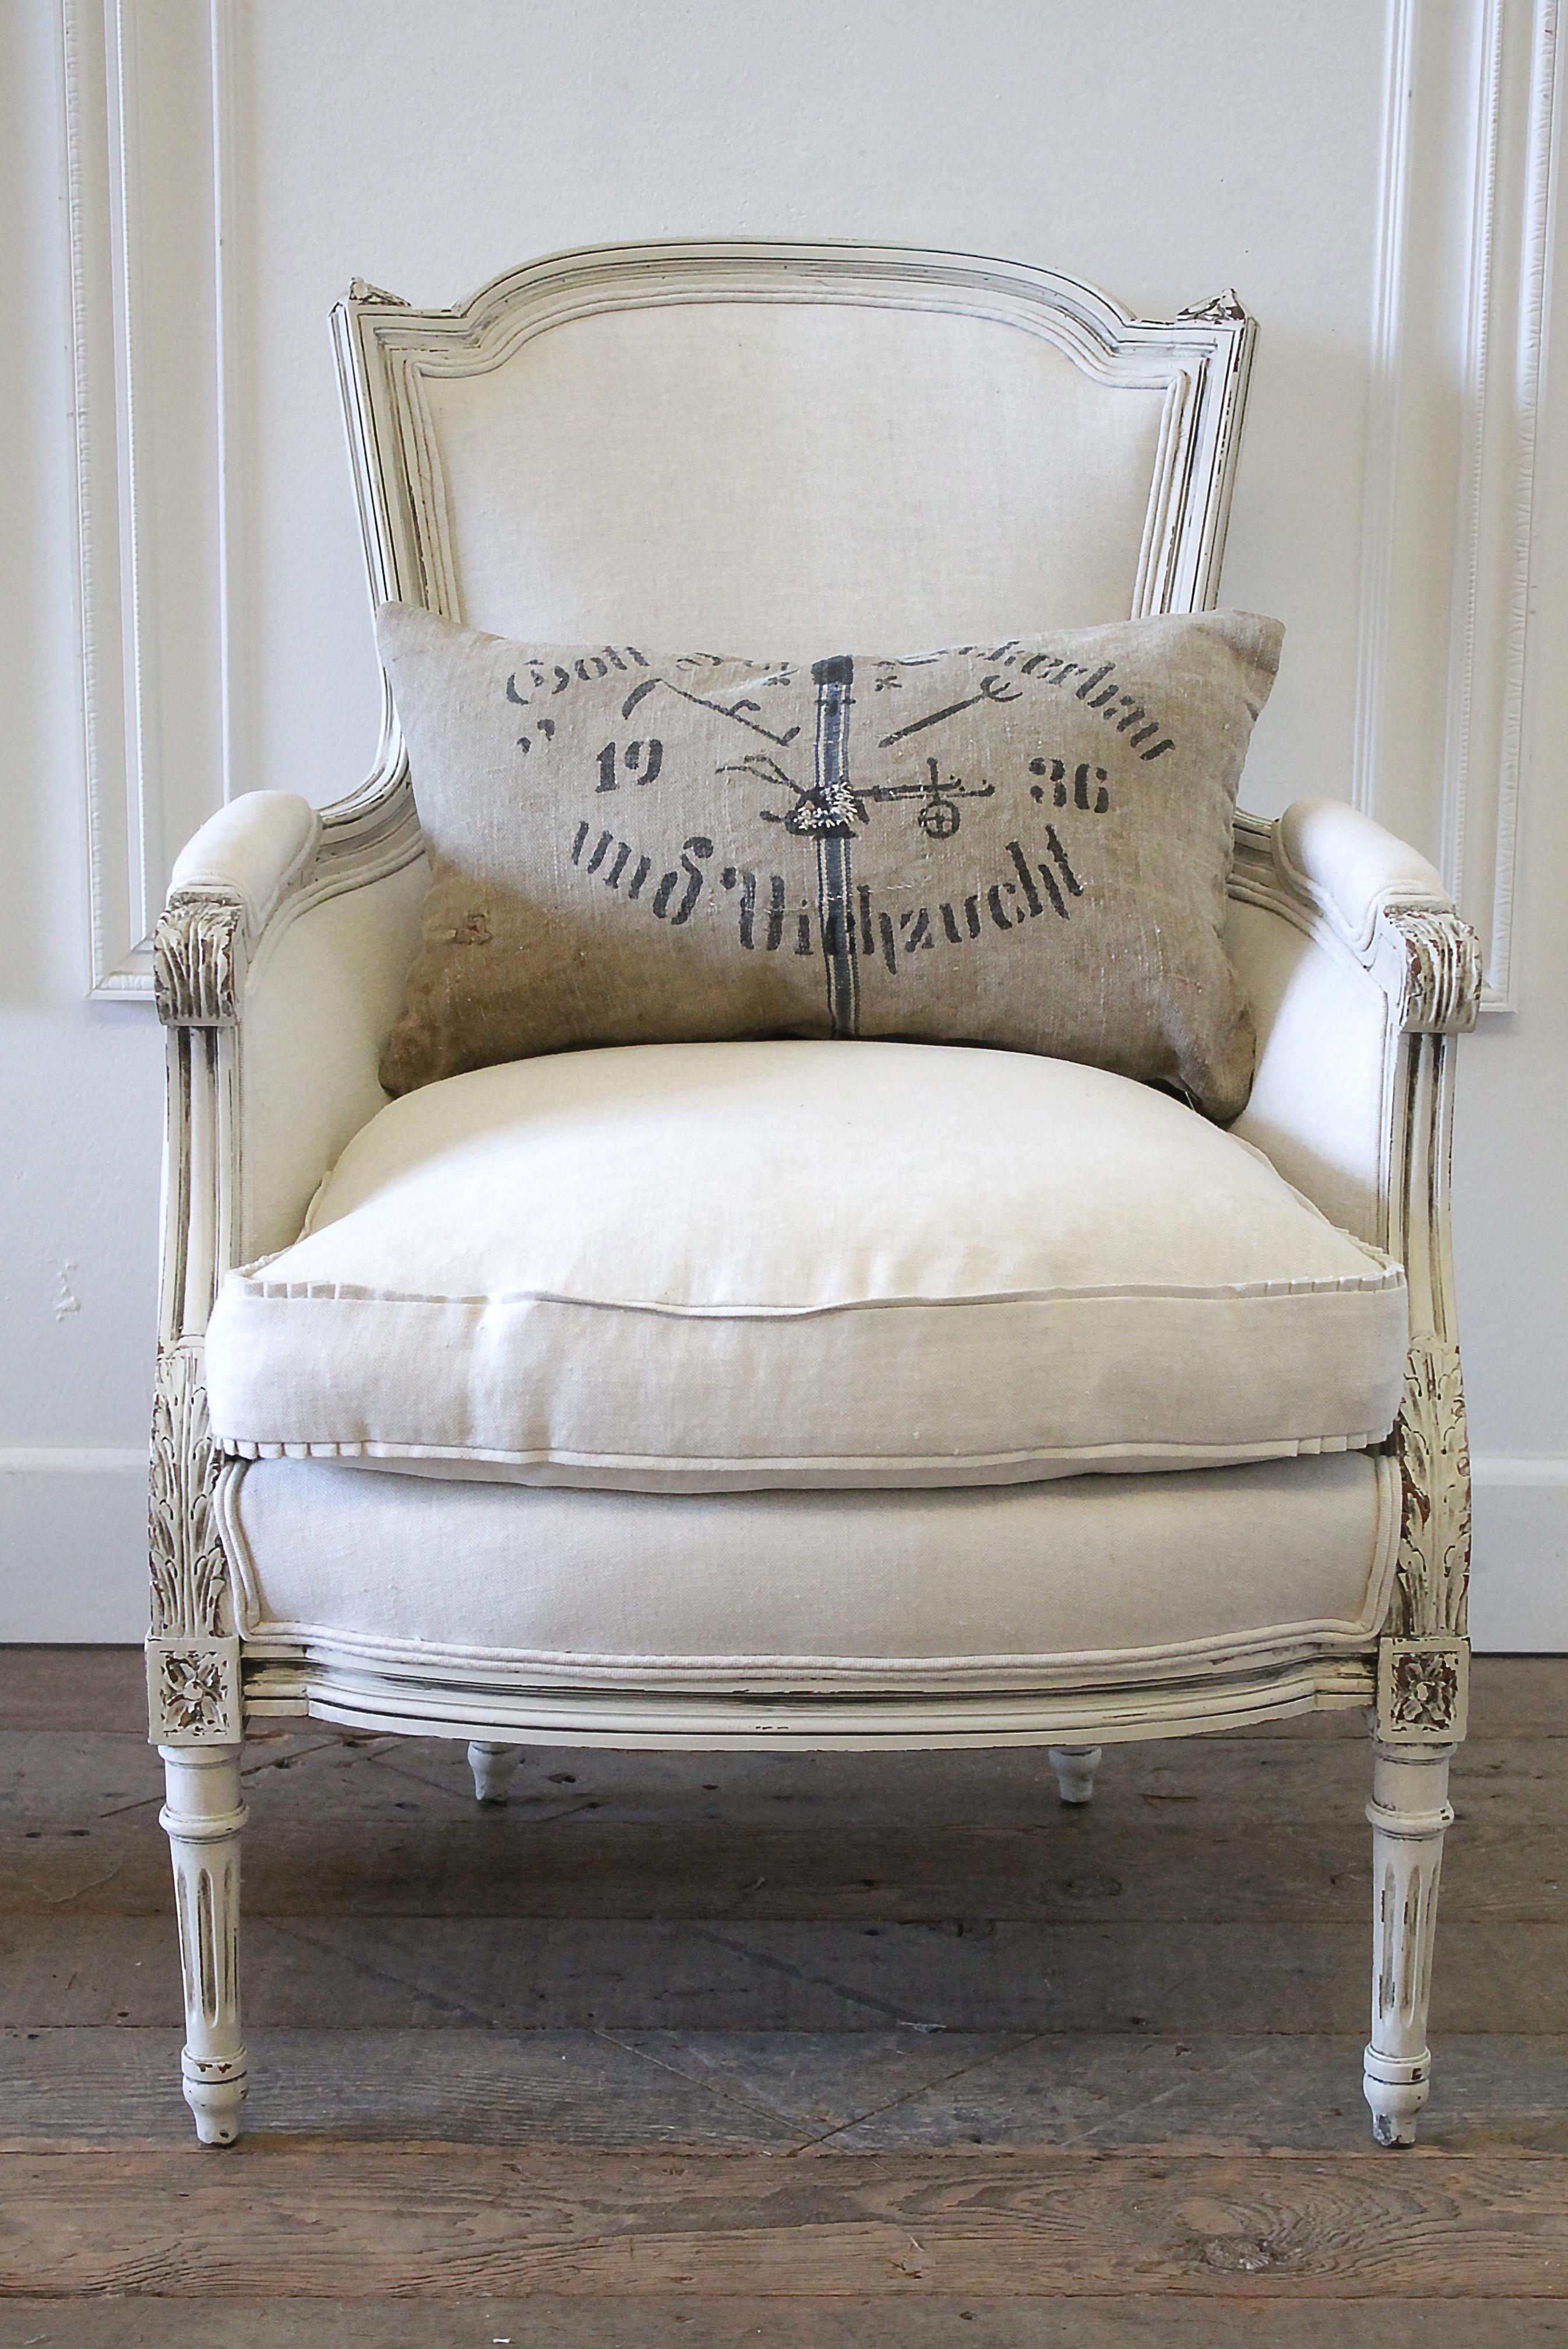 20th century Louis XVI style painted French Bergere chair in natural linen frame is painted in our oyster white paint, with natural aged patina and distressed edges. Louis XVI style with fluted legs, and finials on the top back of the chair with a